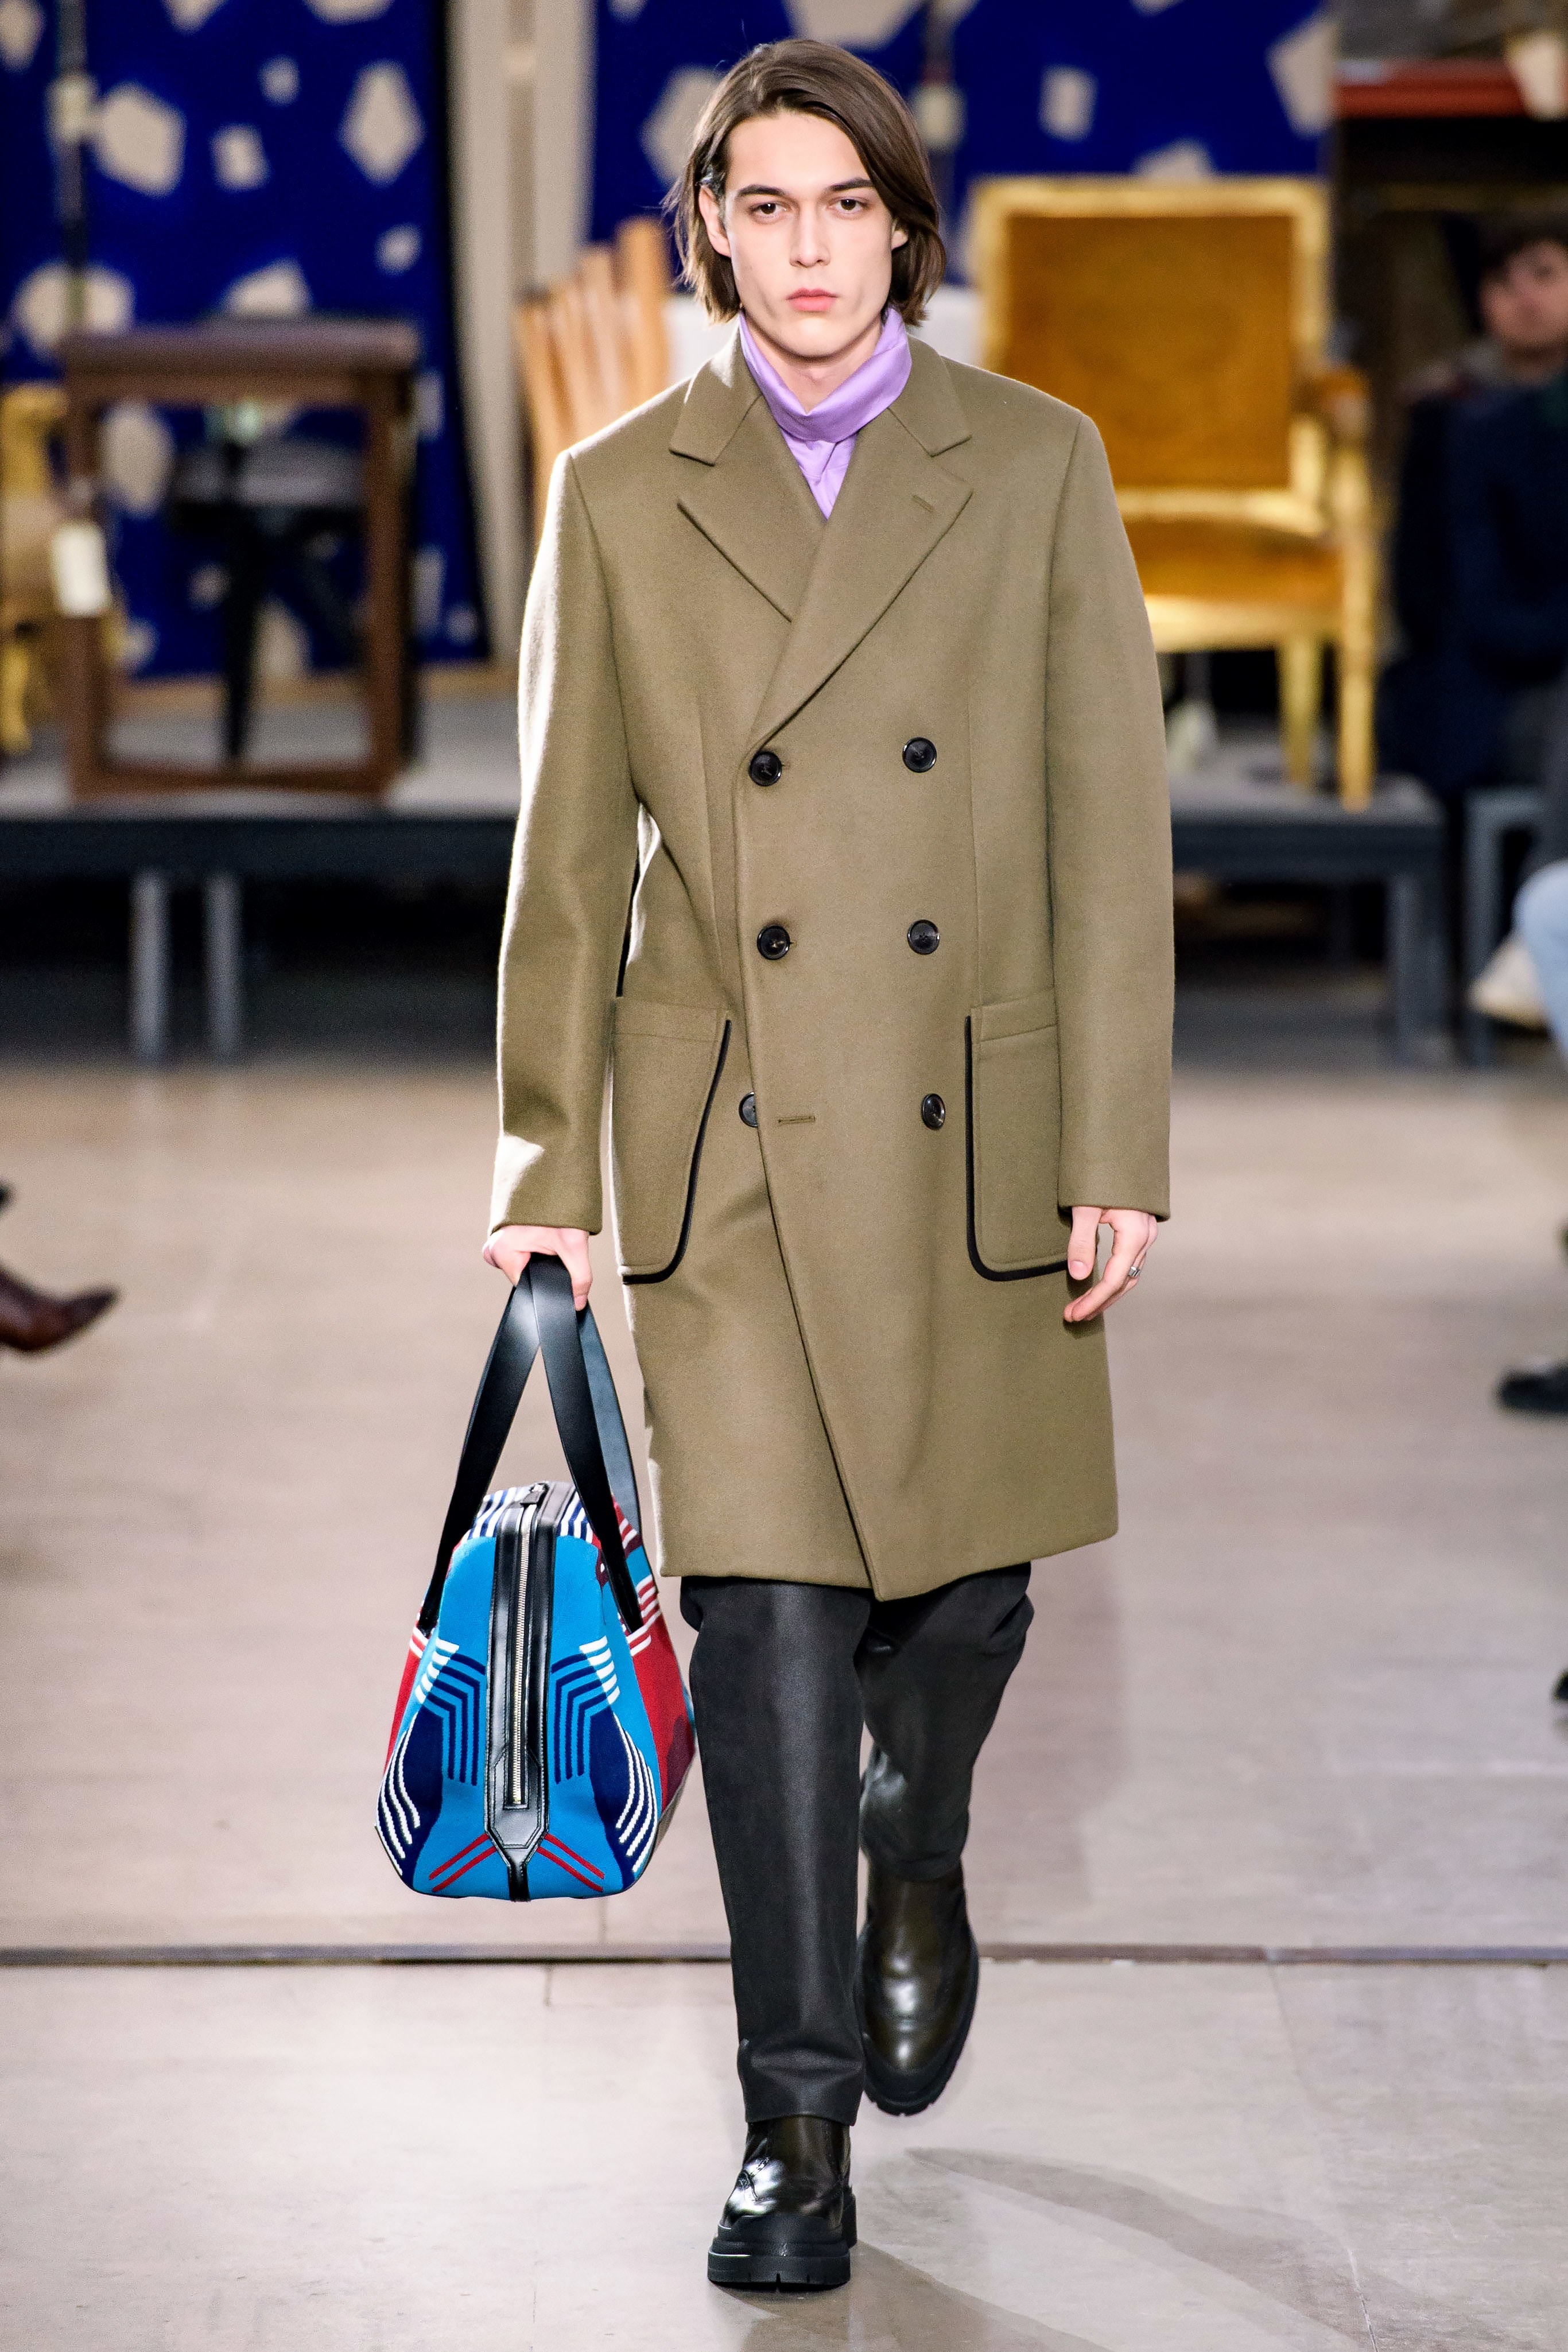 hermes fw19 fall winter 2018 mens menswear collection runway paris fashion week january clothes coats outerwear shirts pants jackets leather blue brown grey gray black orange brown info details